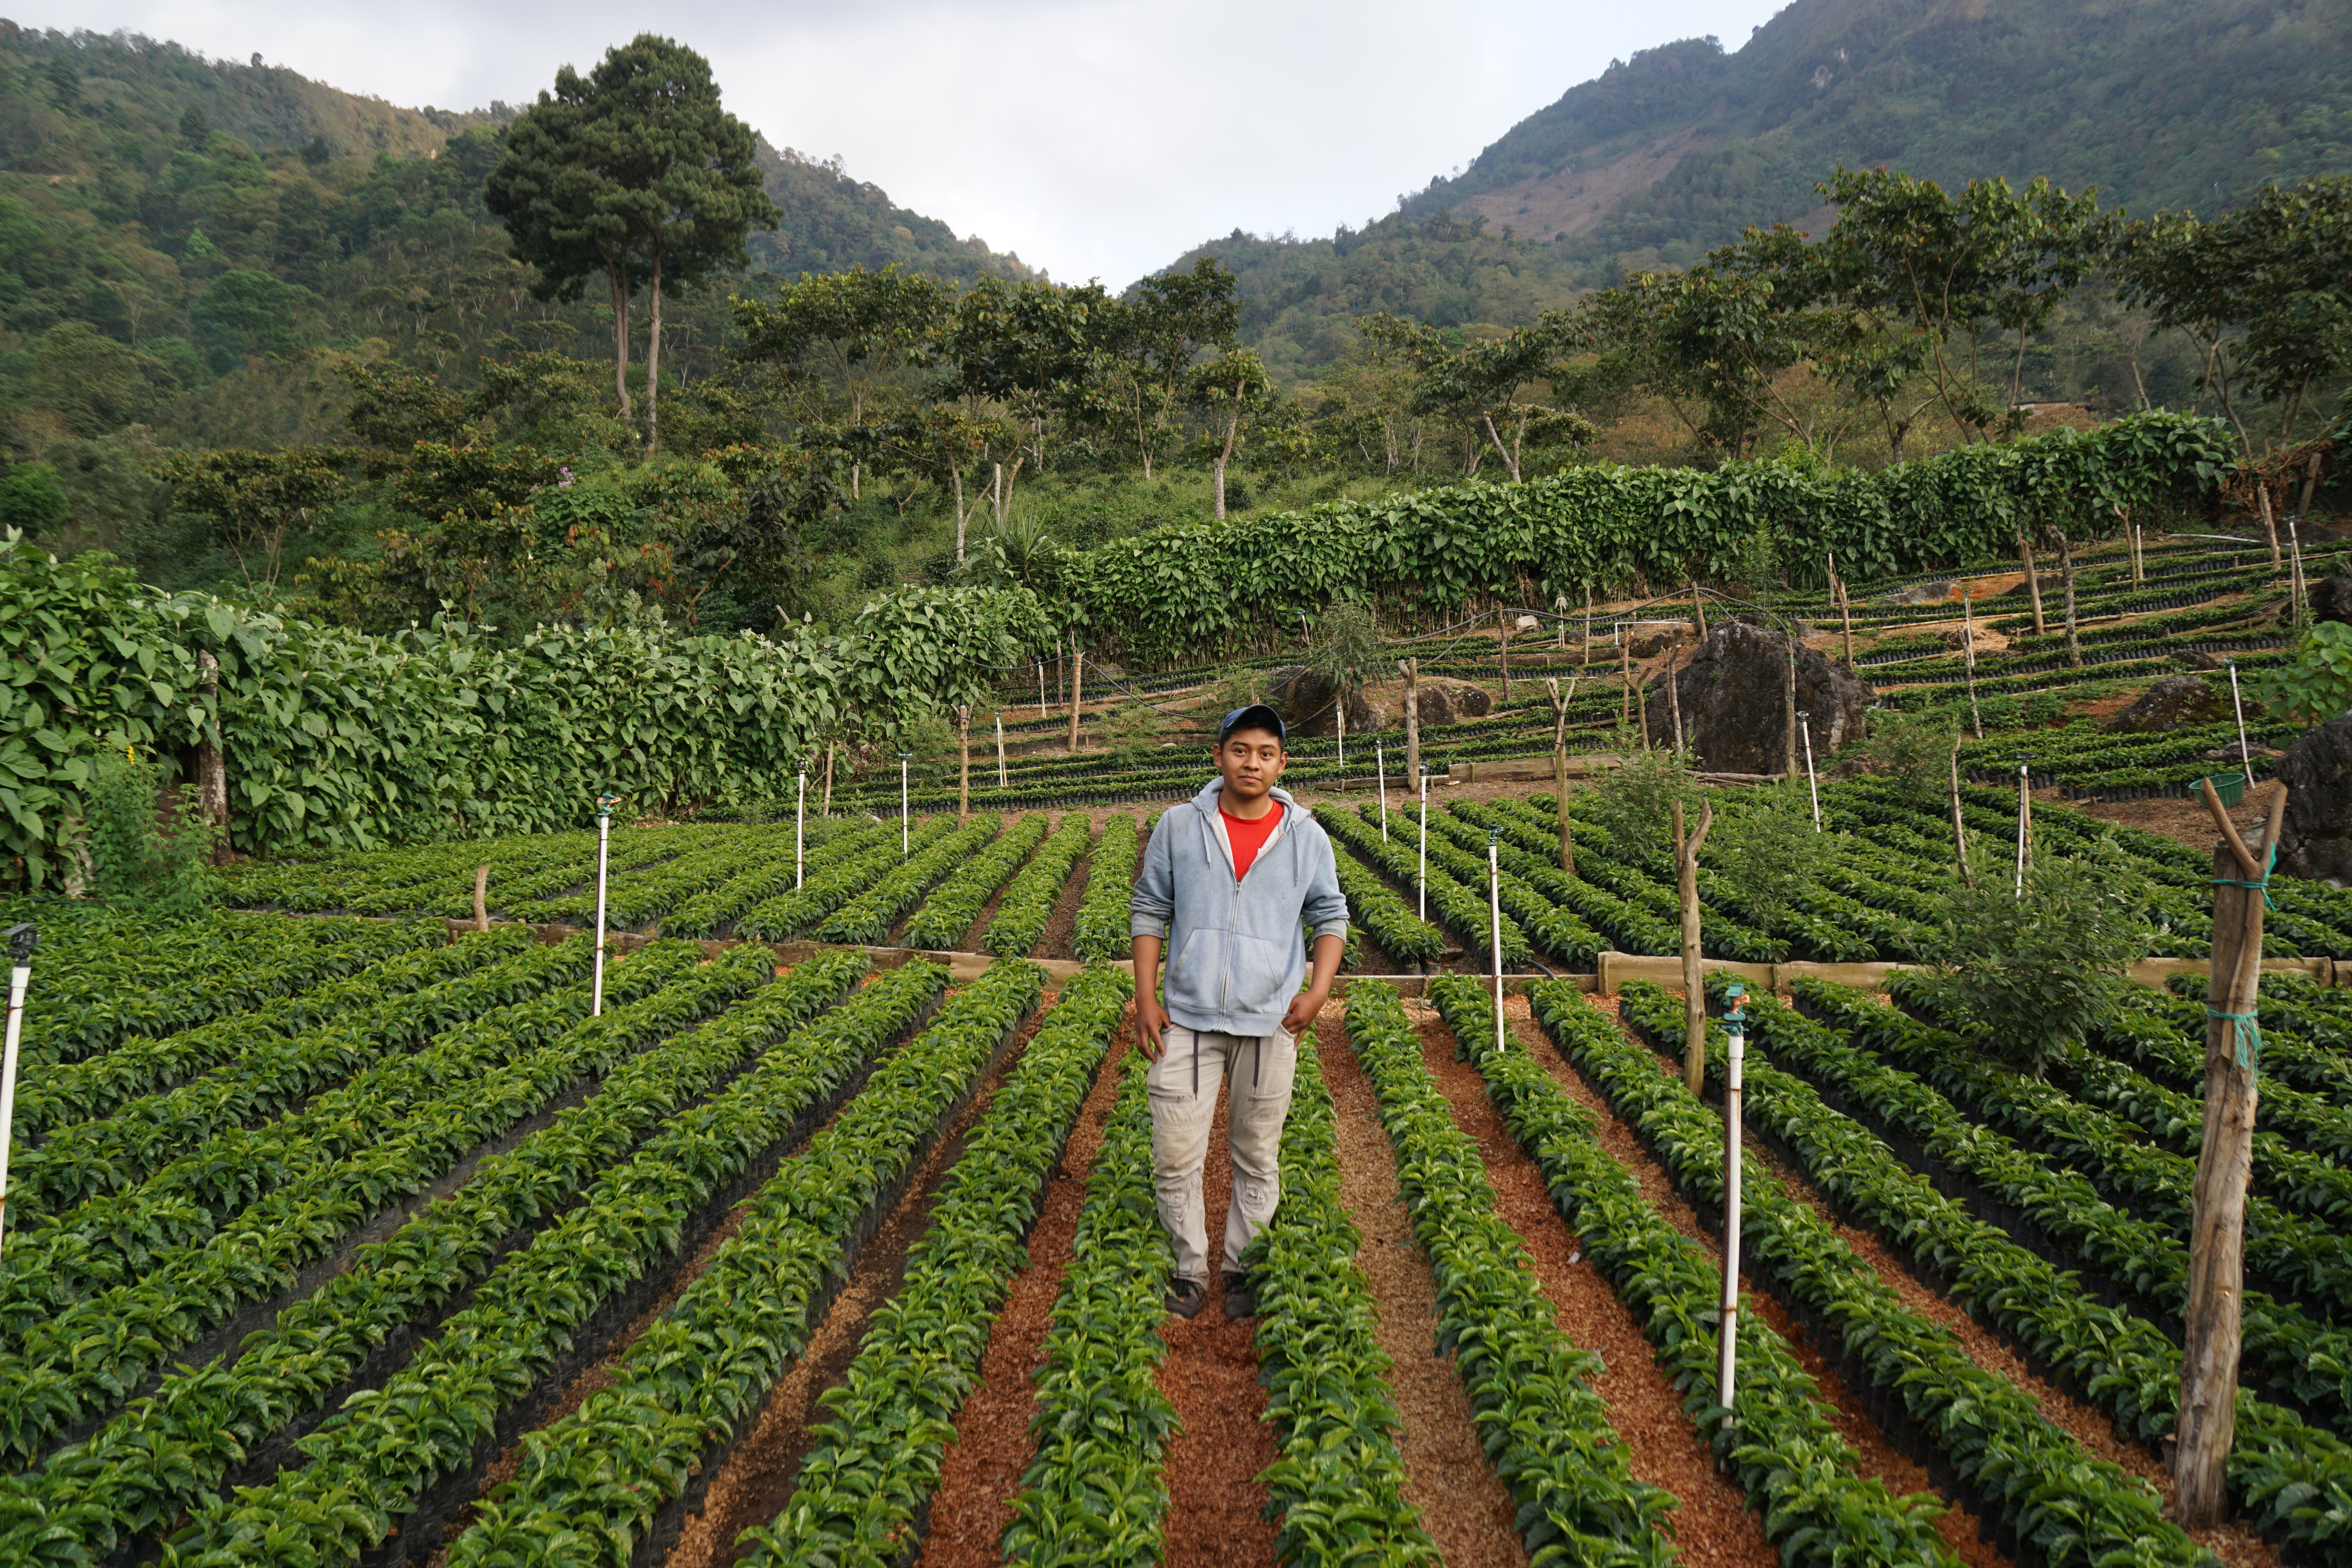 Manager at the nursery where Vista Hermosa grows new coffee trees